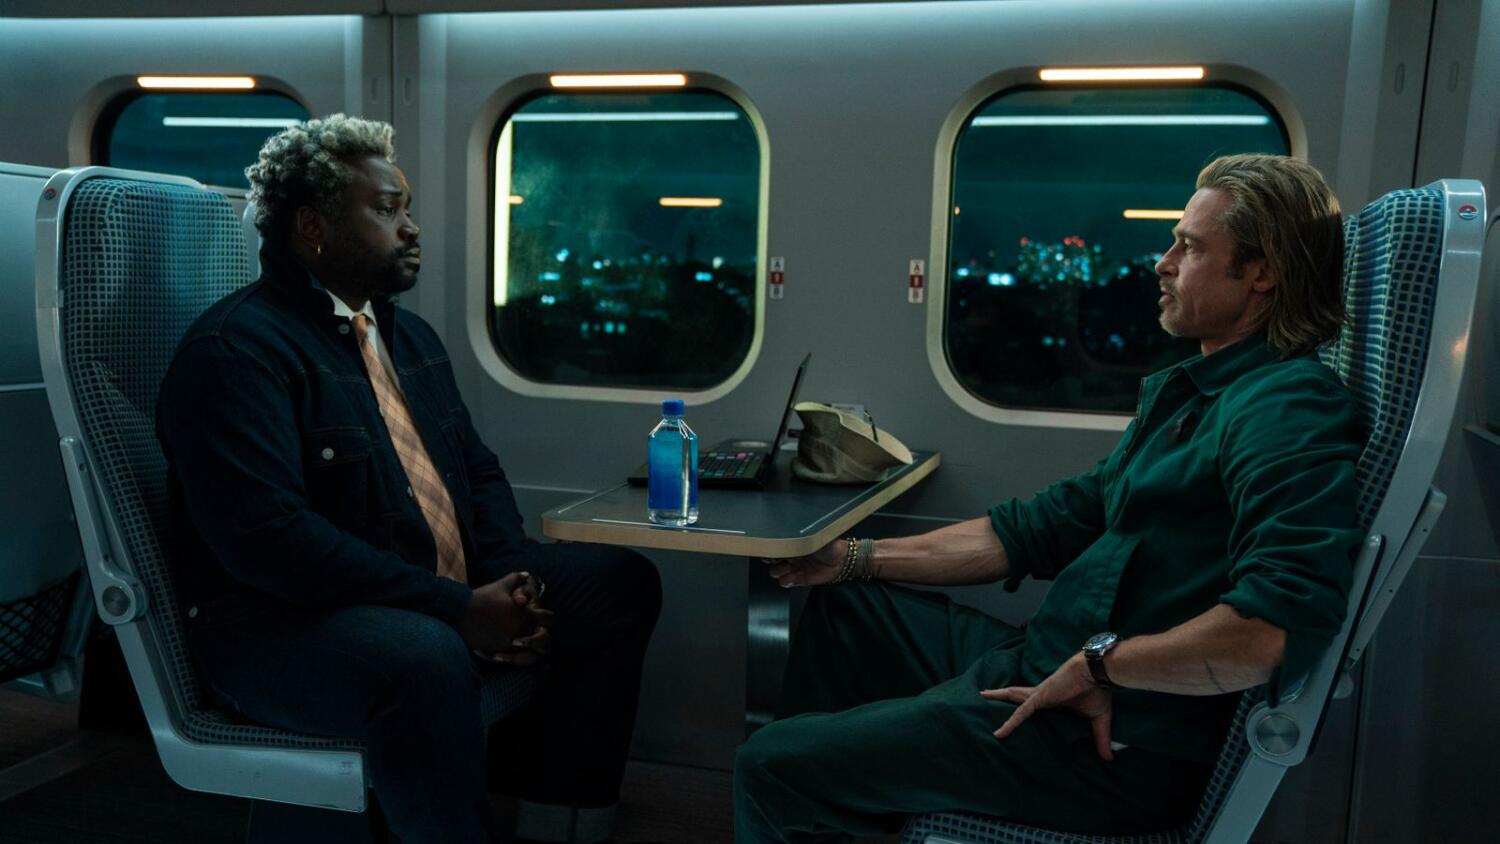 This image released by Sony Pictures shows Bryan Tyree Henry, left, and Brad Pitt in a scene from 'Bullet Train.' (Scott Garfield/Sony Pictures via AP)